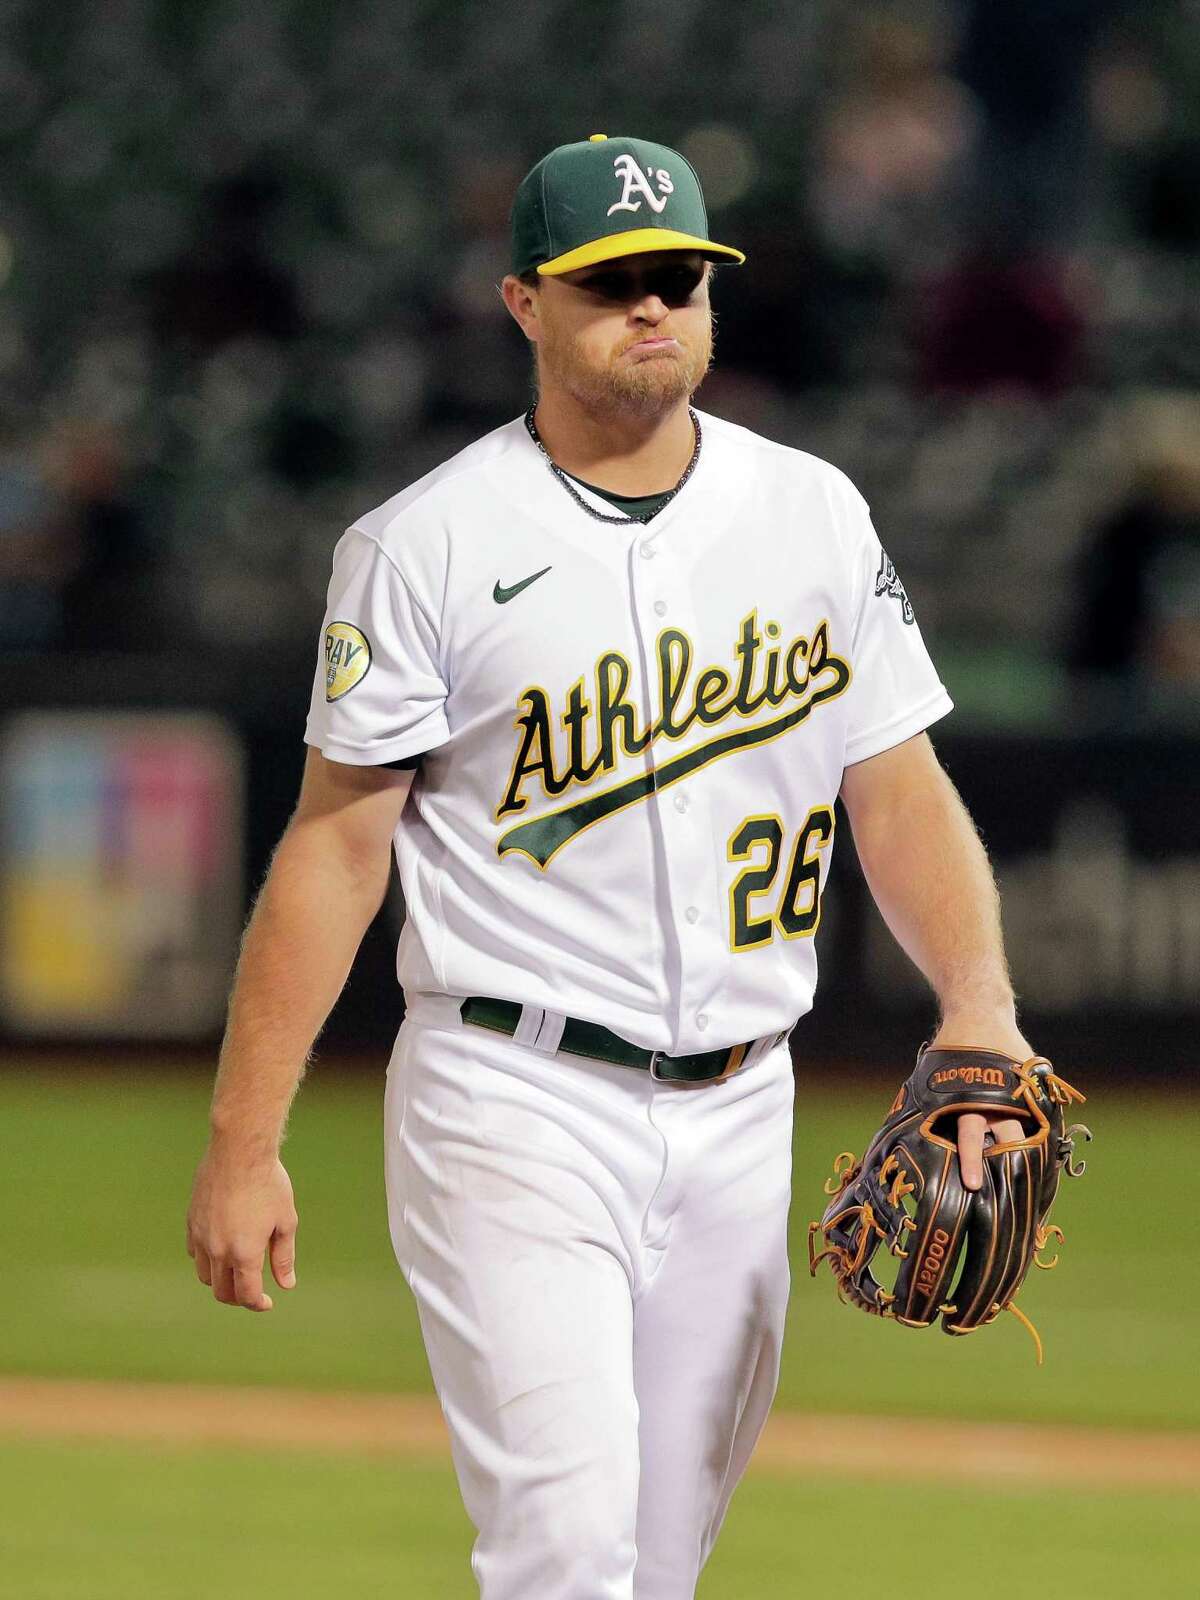 Sheldon Neuse (26) walks off the mound after pitching a perfect ninth inning as the Oakland Athletics play the Seattle Mariners at the Coliseum in Oakland, Calif., on Wednesday, June 22, 2022.